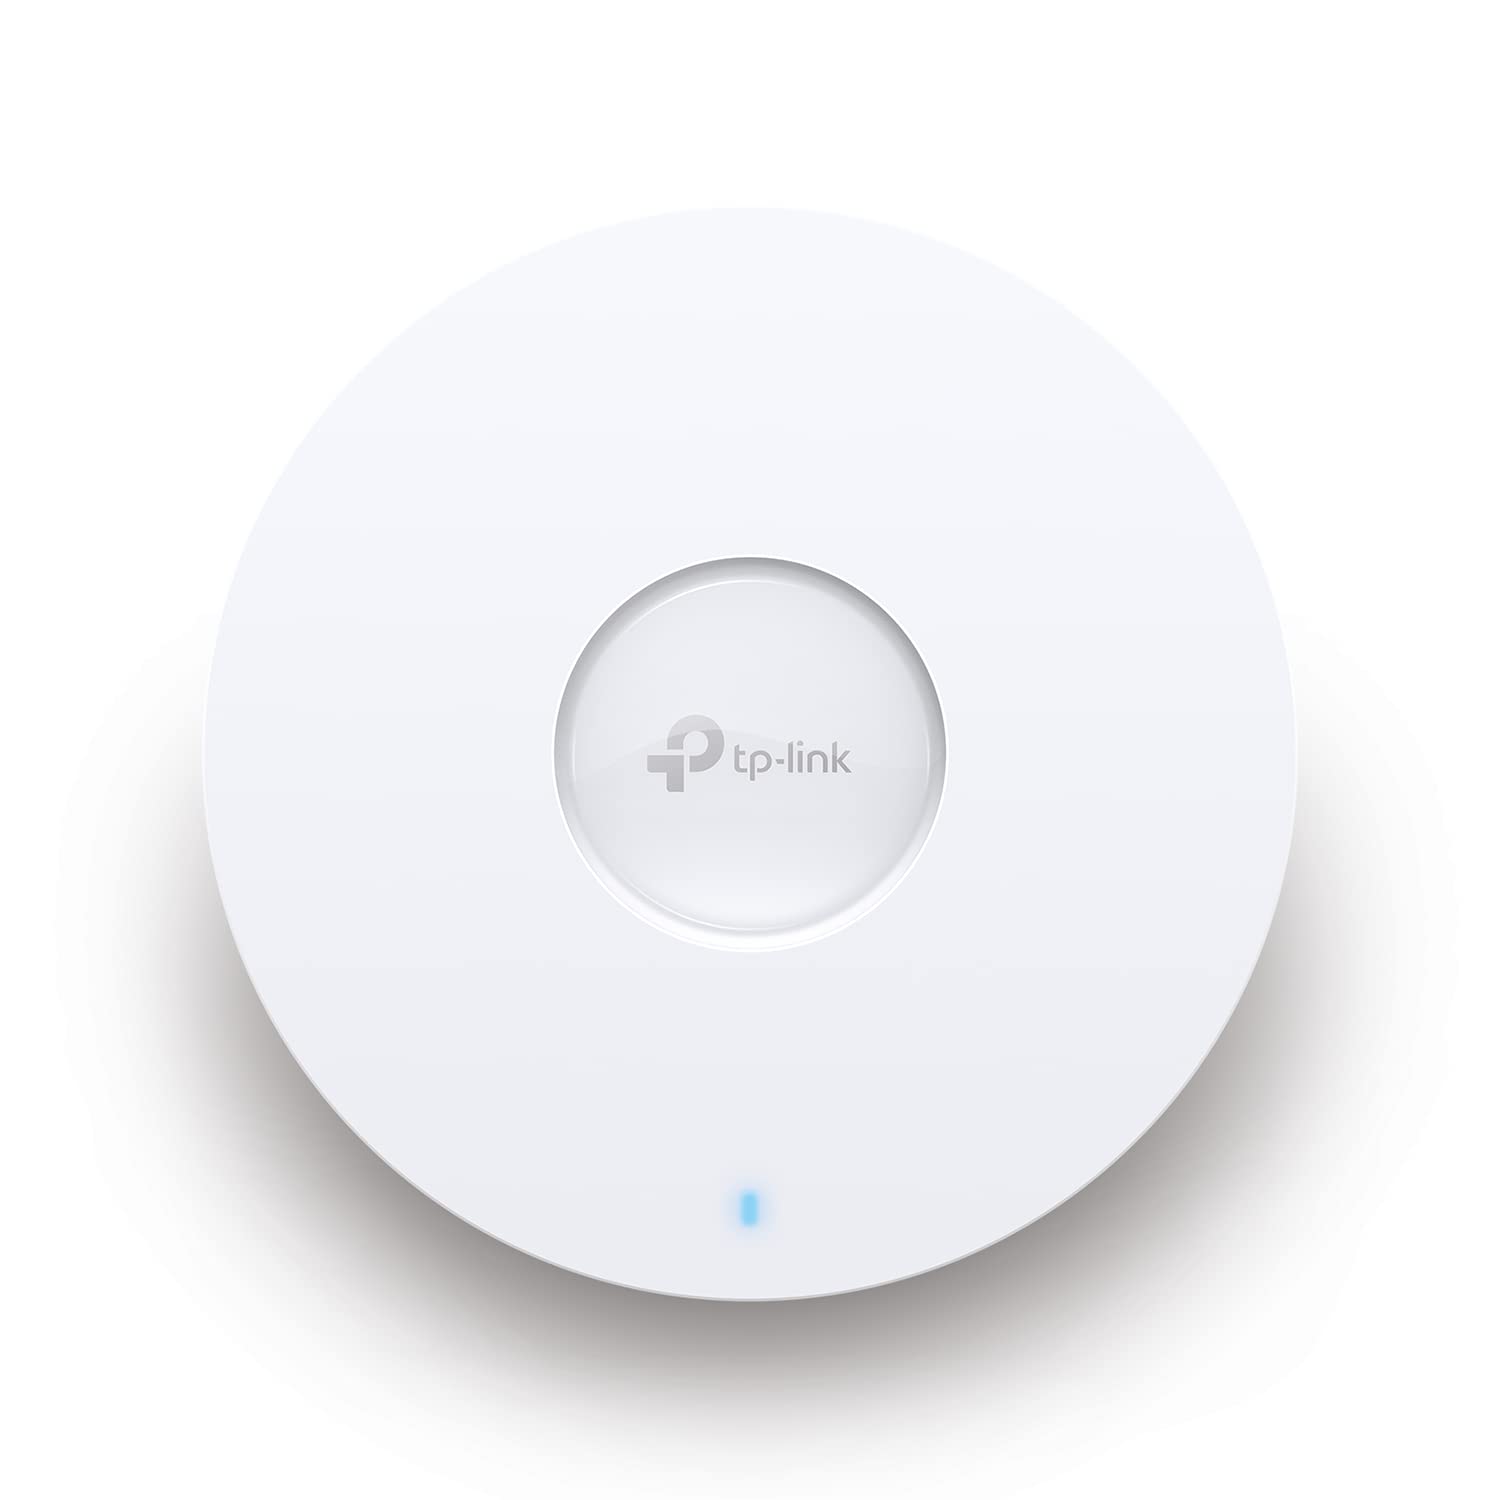 TP-Link EAP610 v2 Ultra-Slim Wireless Access Point Omada True Wi-Fi 6 AX1800 DC Adapter Included Mesh Seamless Roaming, WPA3 MU-MIMO Remote & App Control PoE+ Powered - $84.99